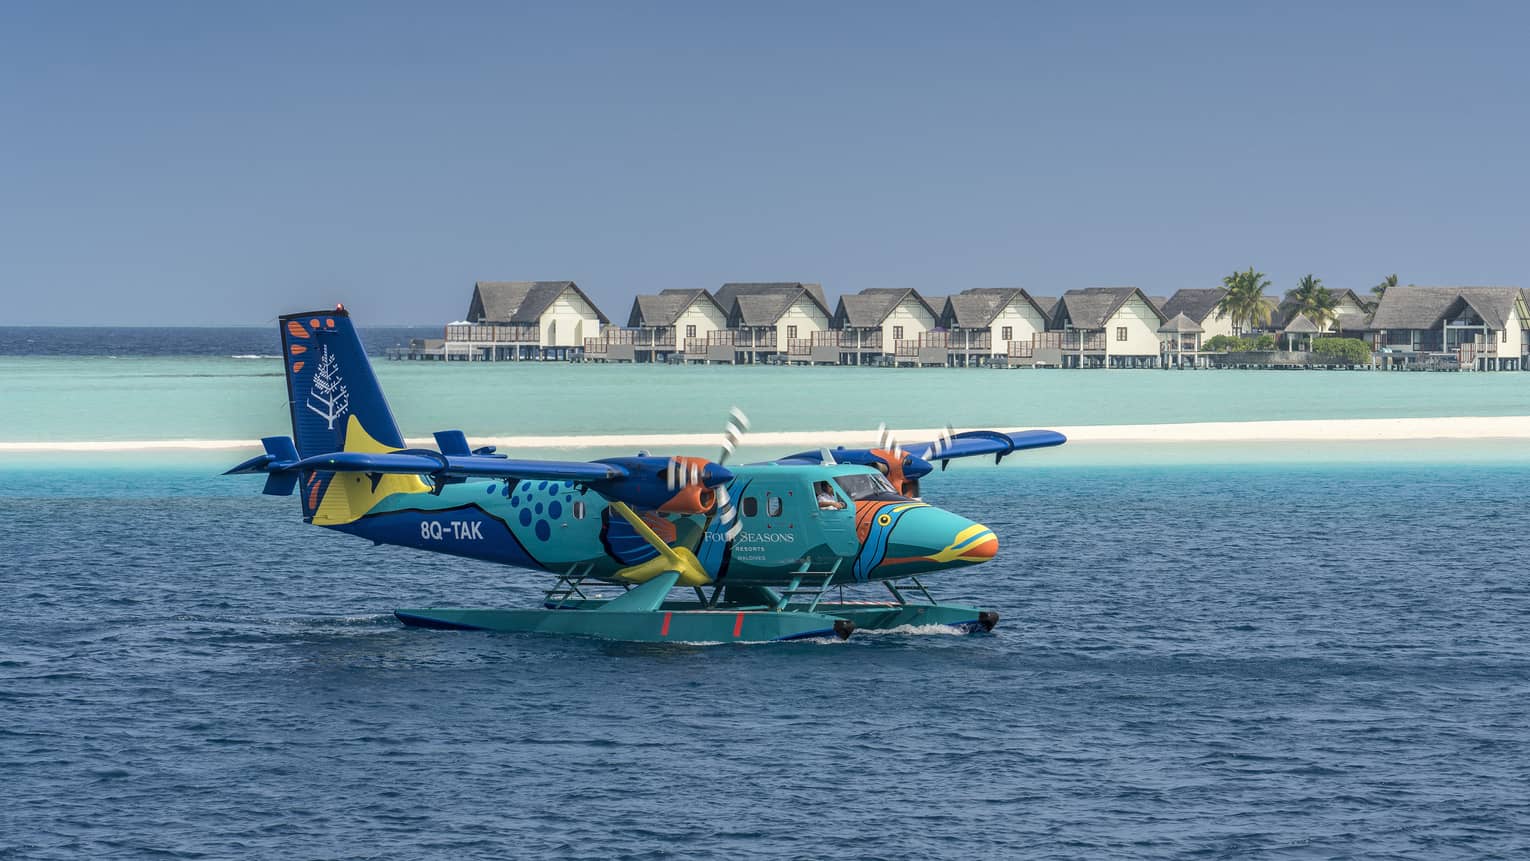 The Four Seasons sea plane landing on calm water in front of beach houses and palm trees